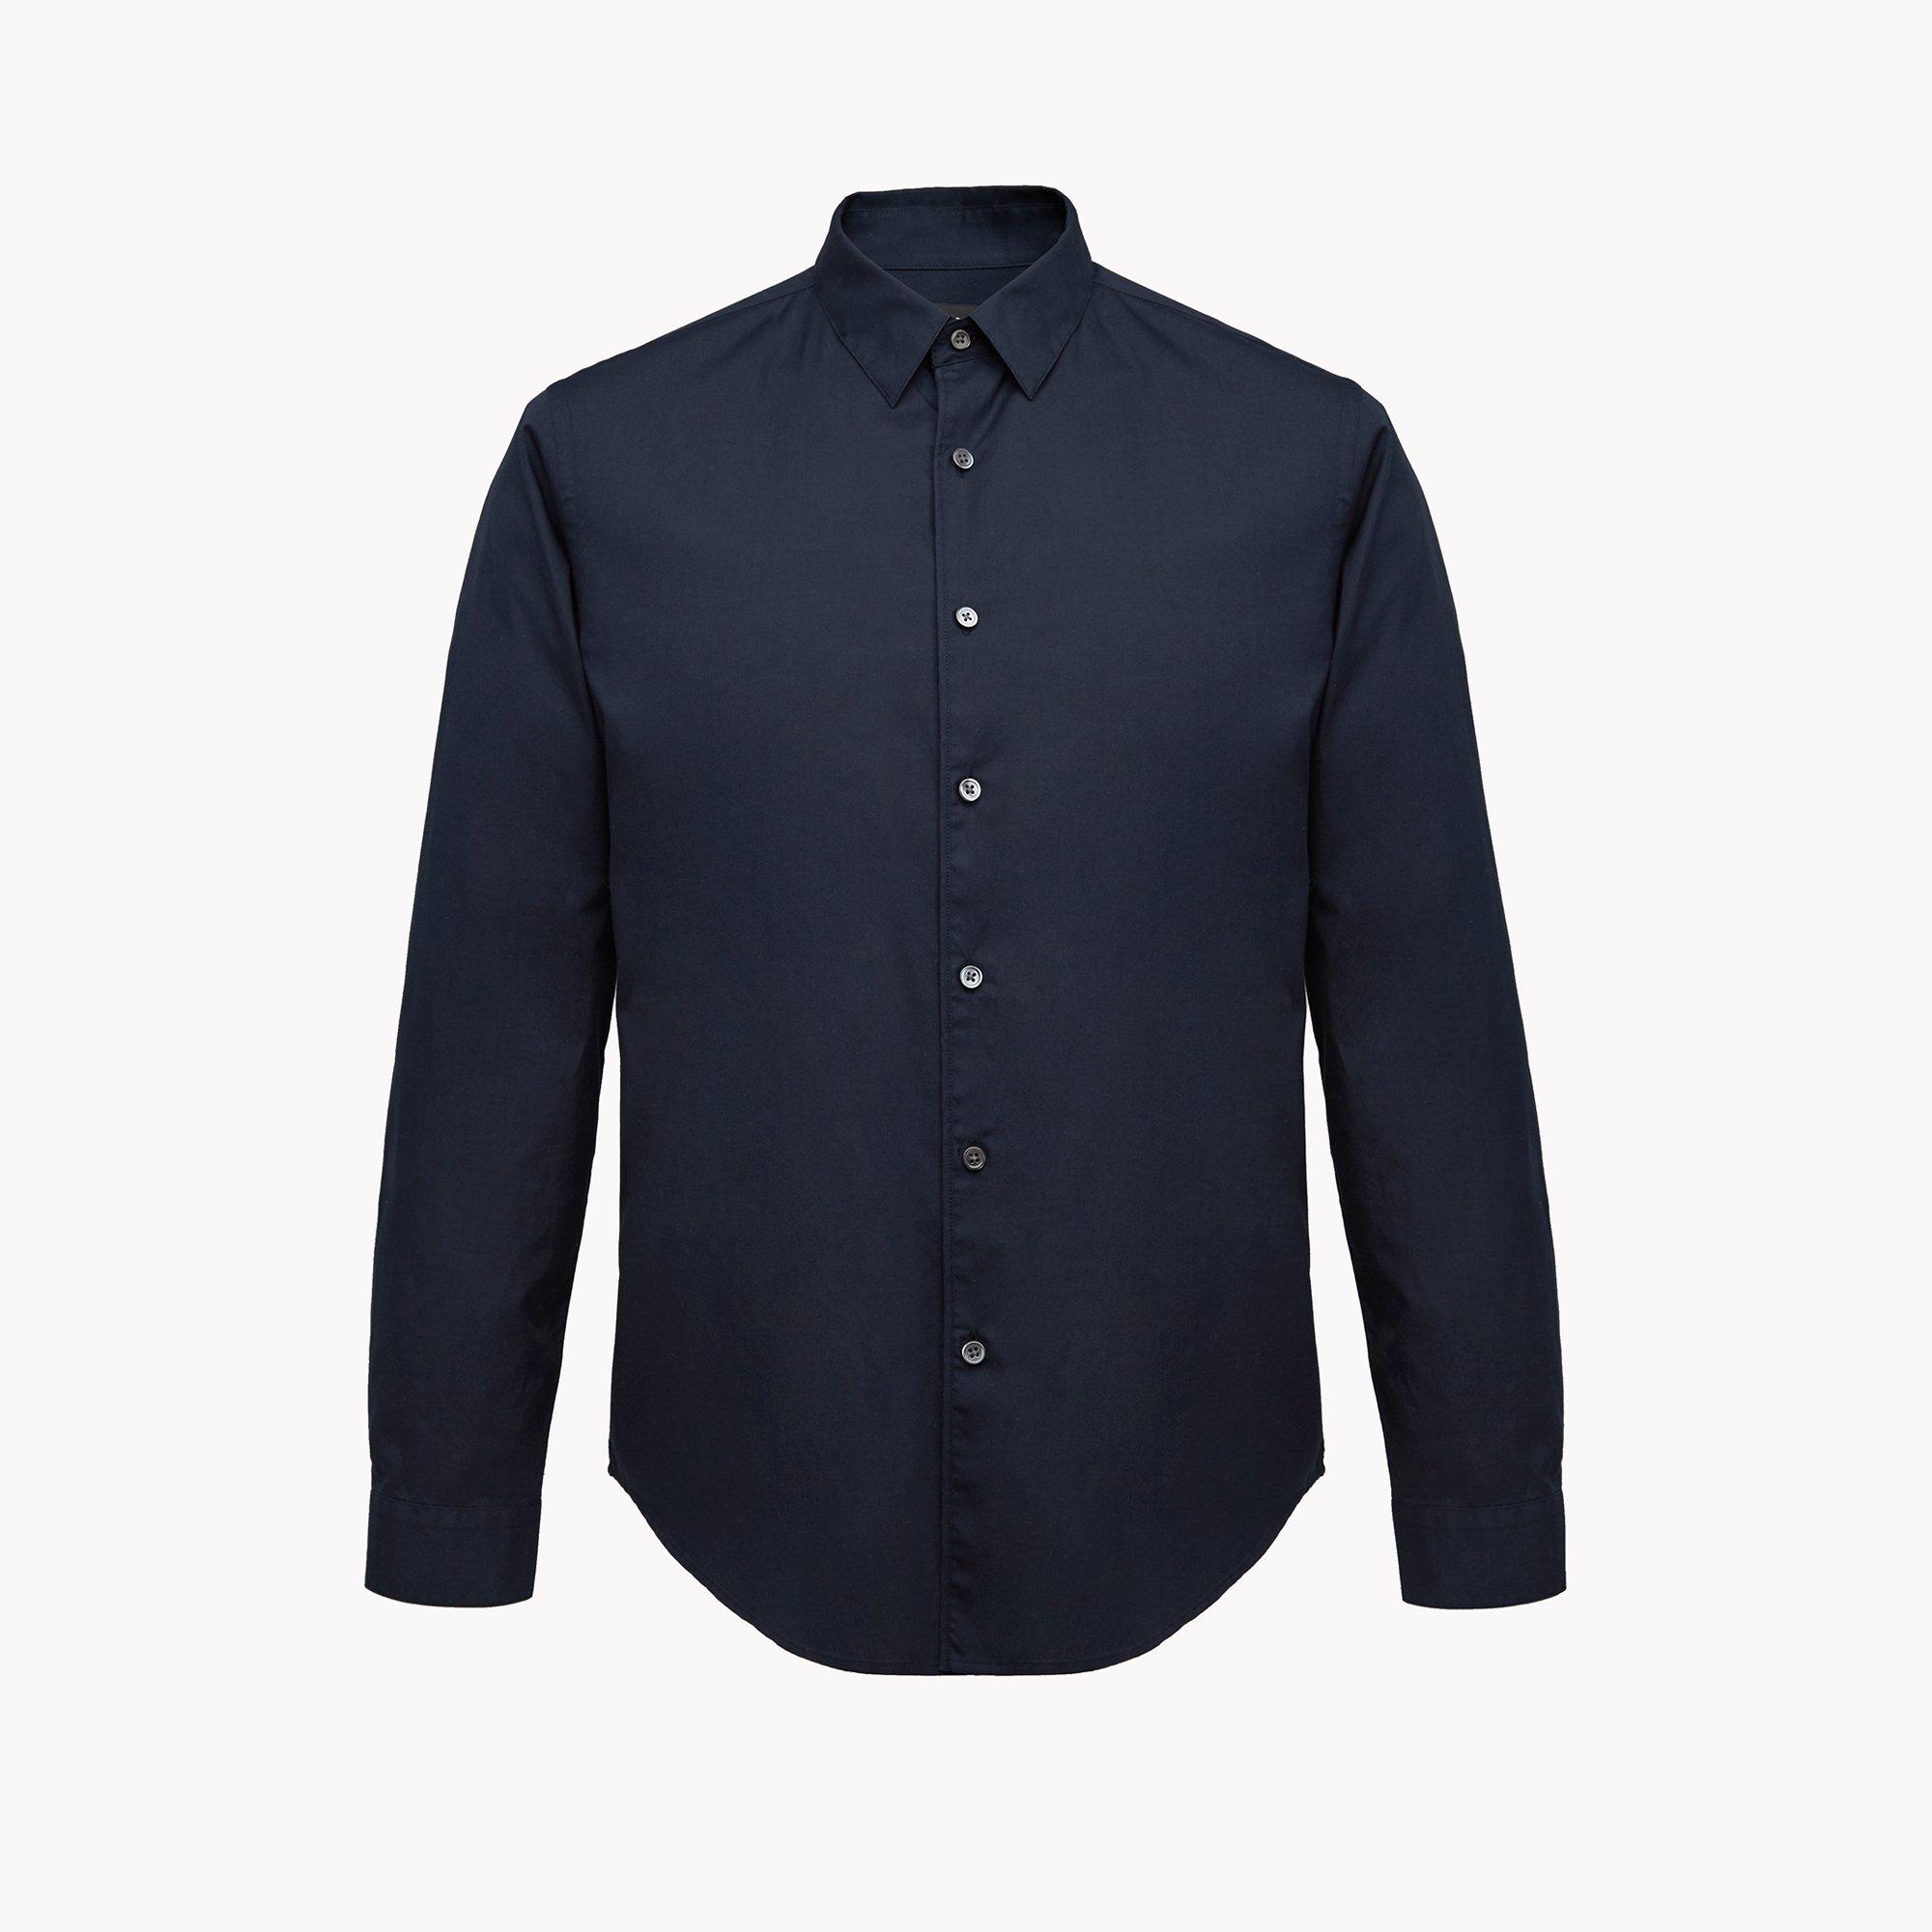 Theory Official Site | Men's Shirts